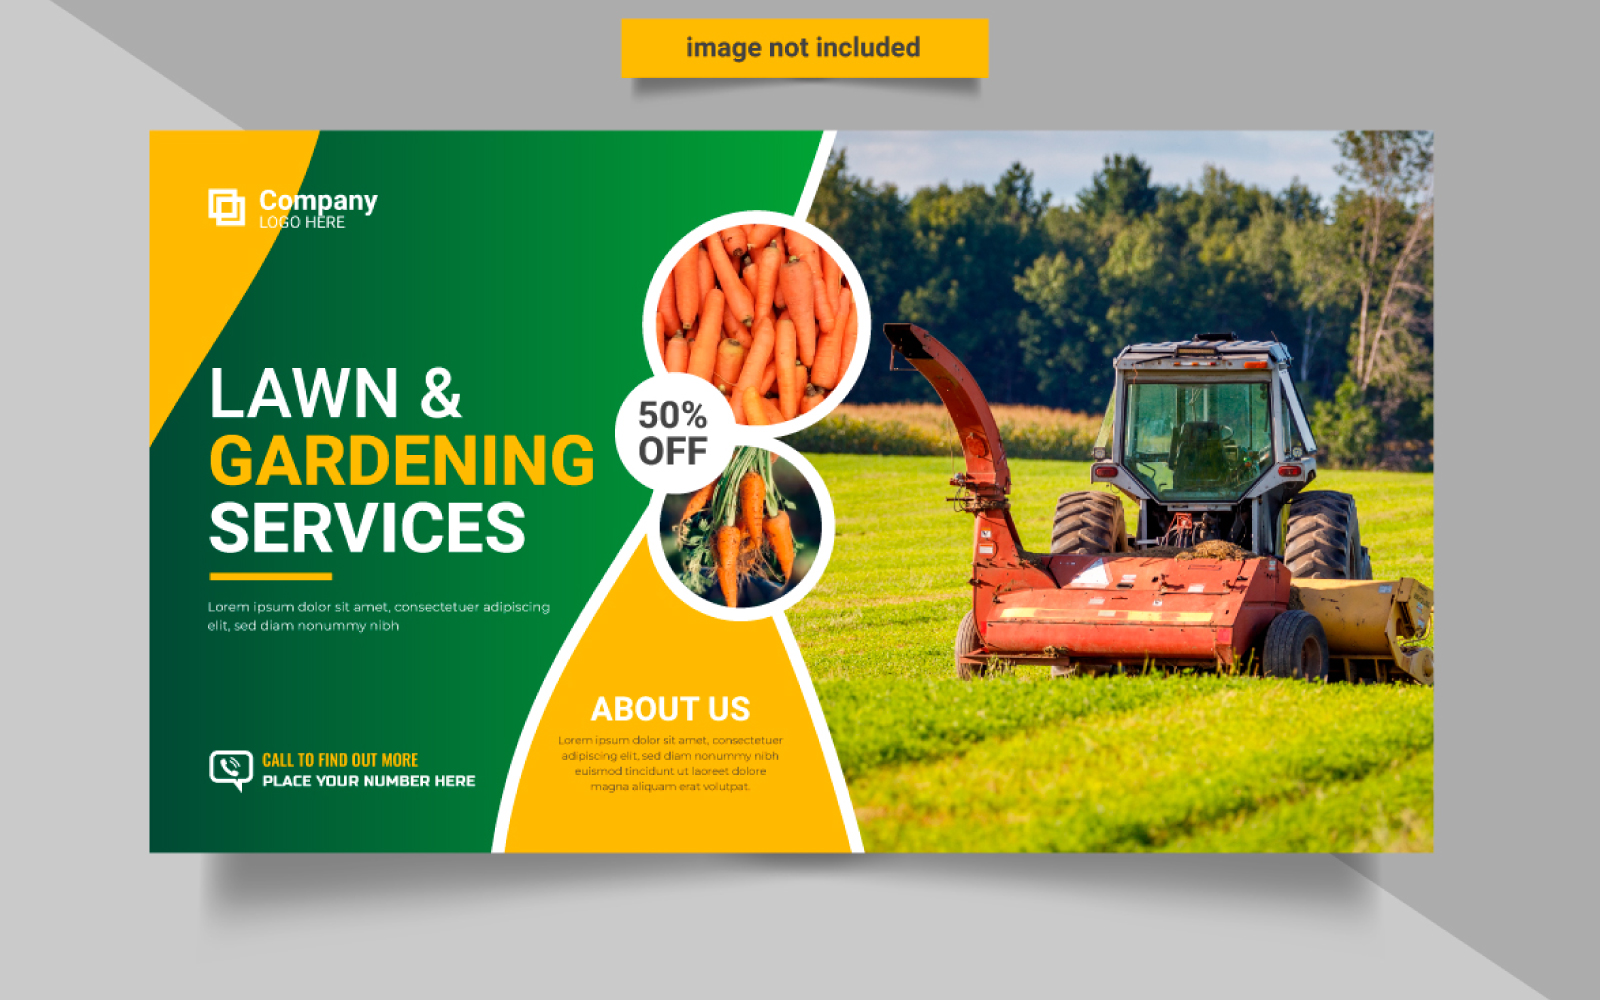 Agro farm and landscaping business web banner design Vector farm management service concept